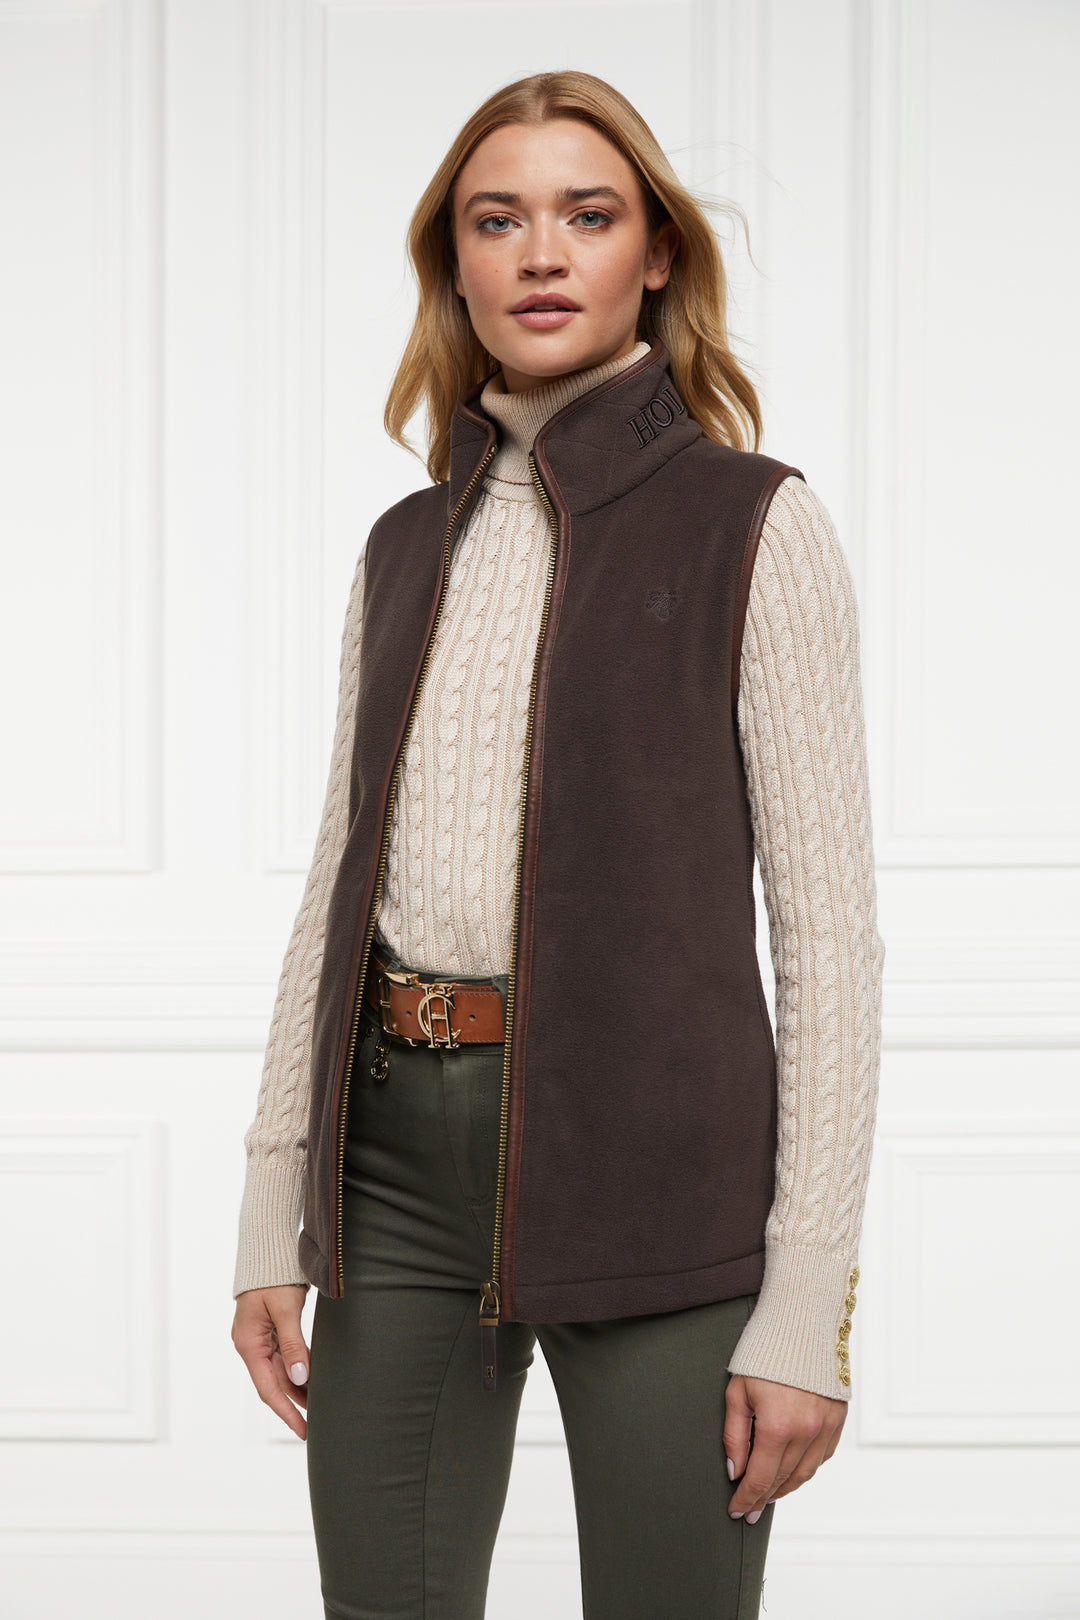 The Holland Cooper Ladies Country Fleece Gilet in chocolate#Chocolate